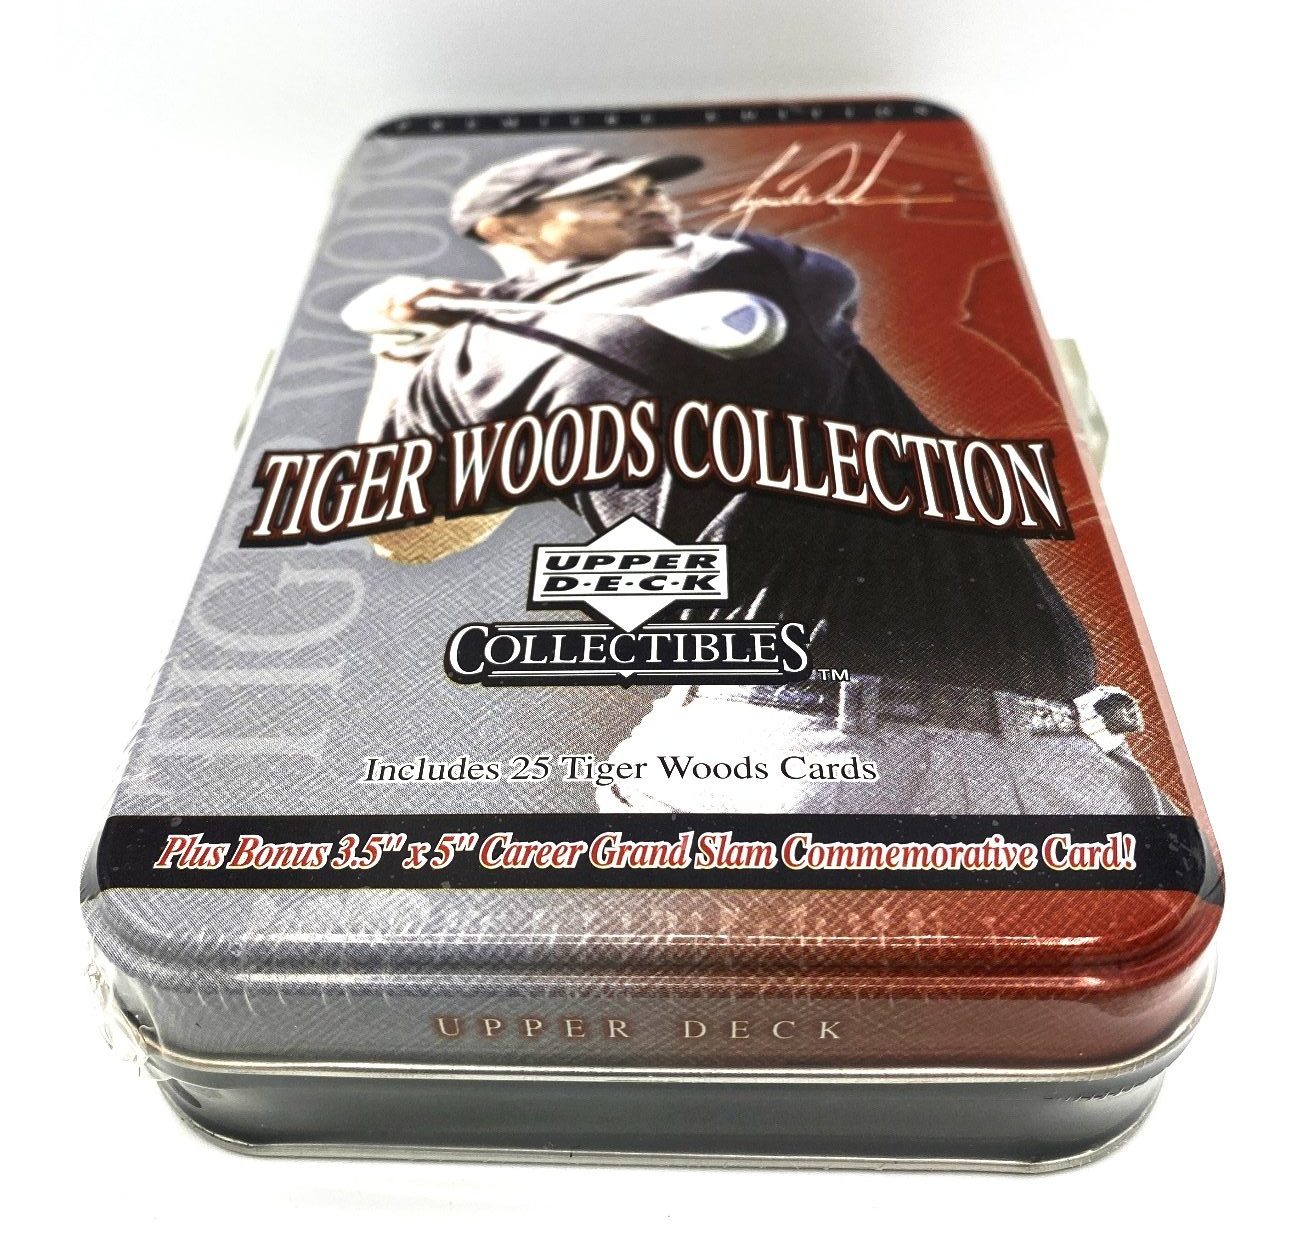 UPPER DECK TIGER WOODS COLLECTION TIN SET OF 25 CARDS & 1 3.5 X 5 COMMEMORATIVE 